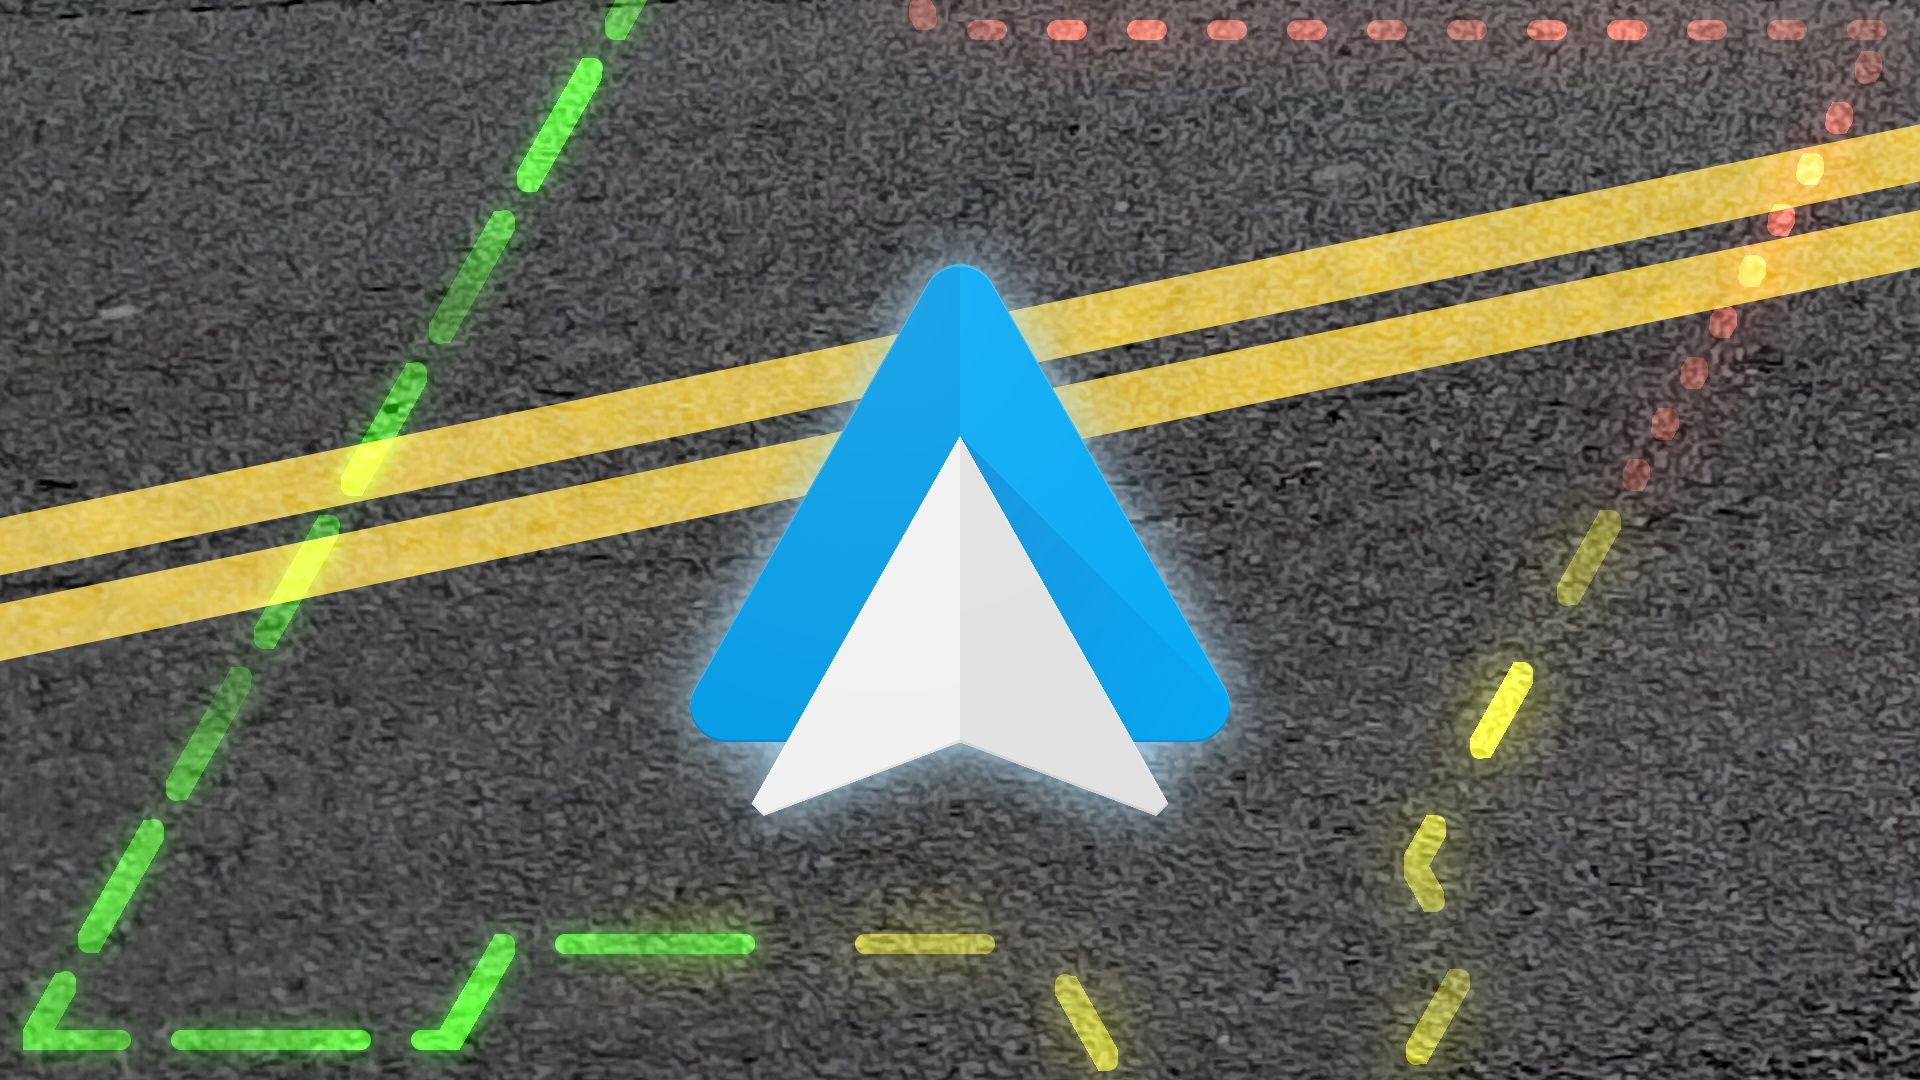 An Android Auto logo on a road with two solid yellow lines background with the Android Police logo in green, red, and yellow dotted lines